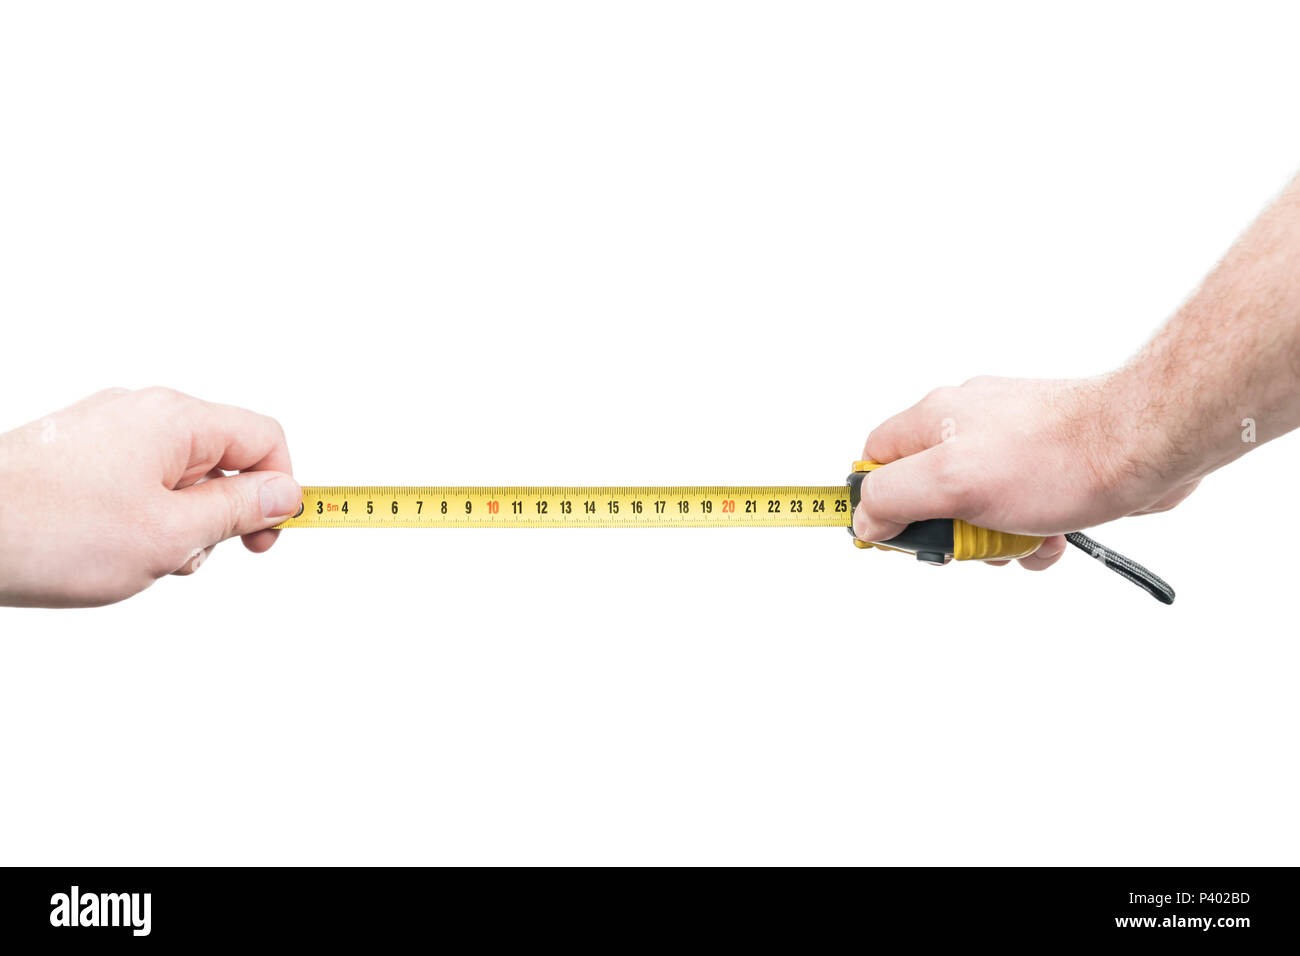 https://c8.alamy.com/comp/P402BD/male-hands-holding-an-open-yellow-tape-measure-isolated-on-a-white-background-first-person-view-P402BD.jpg